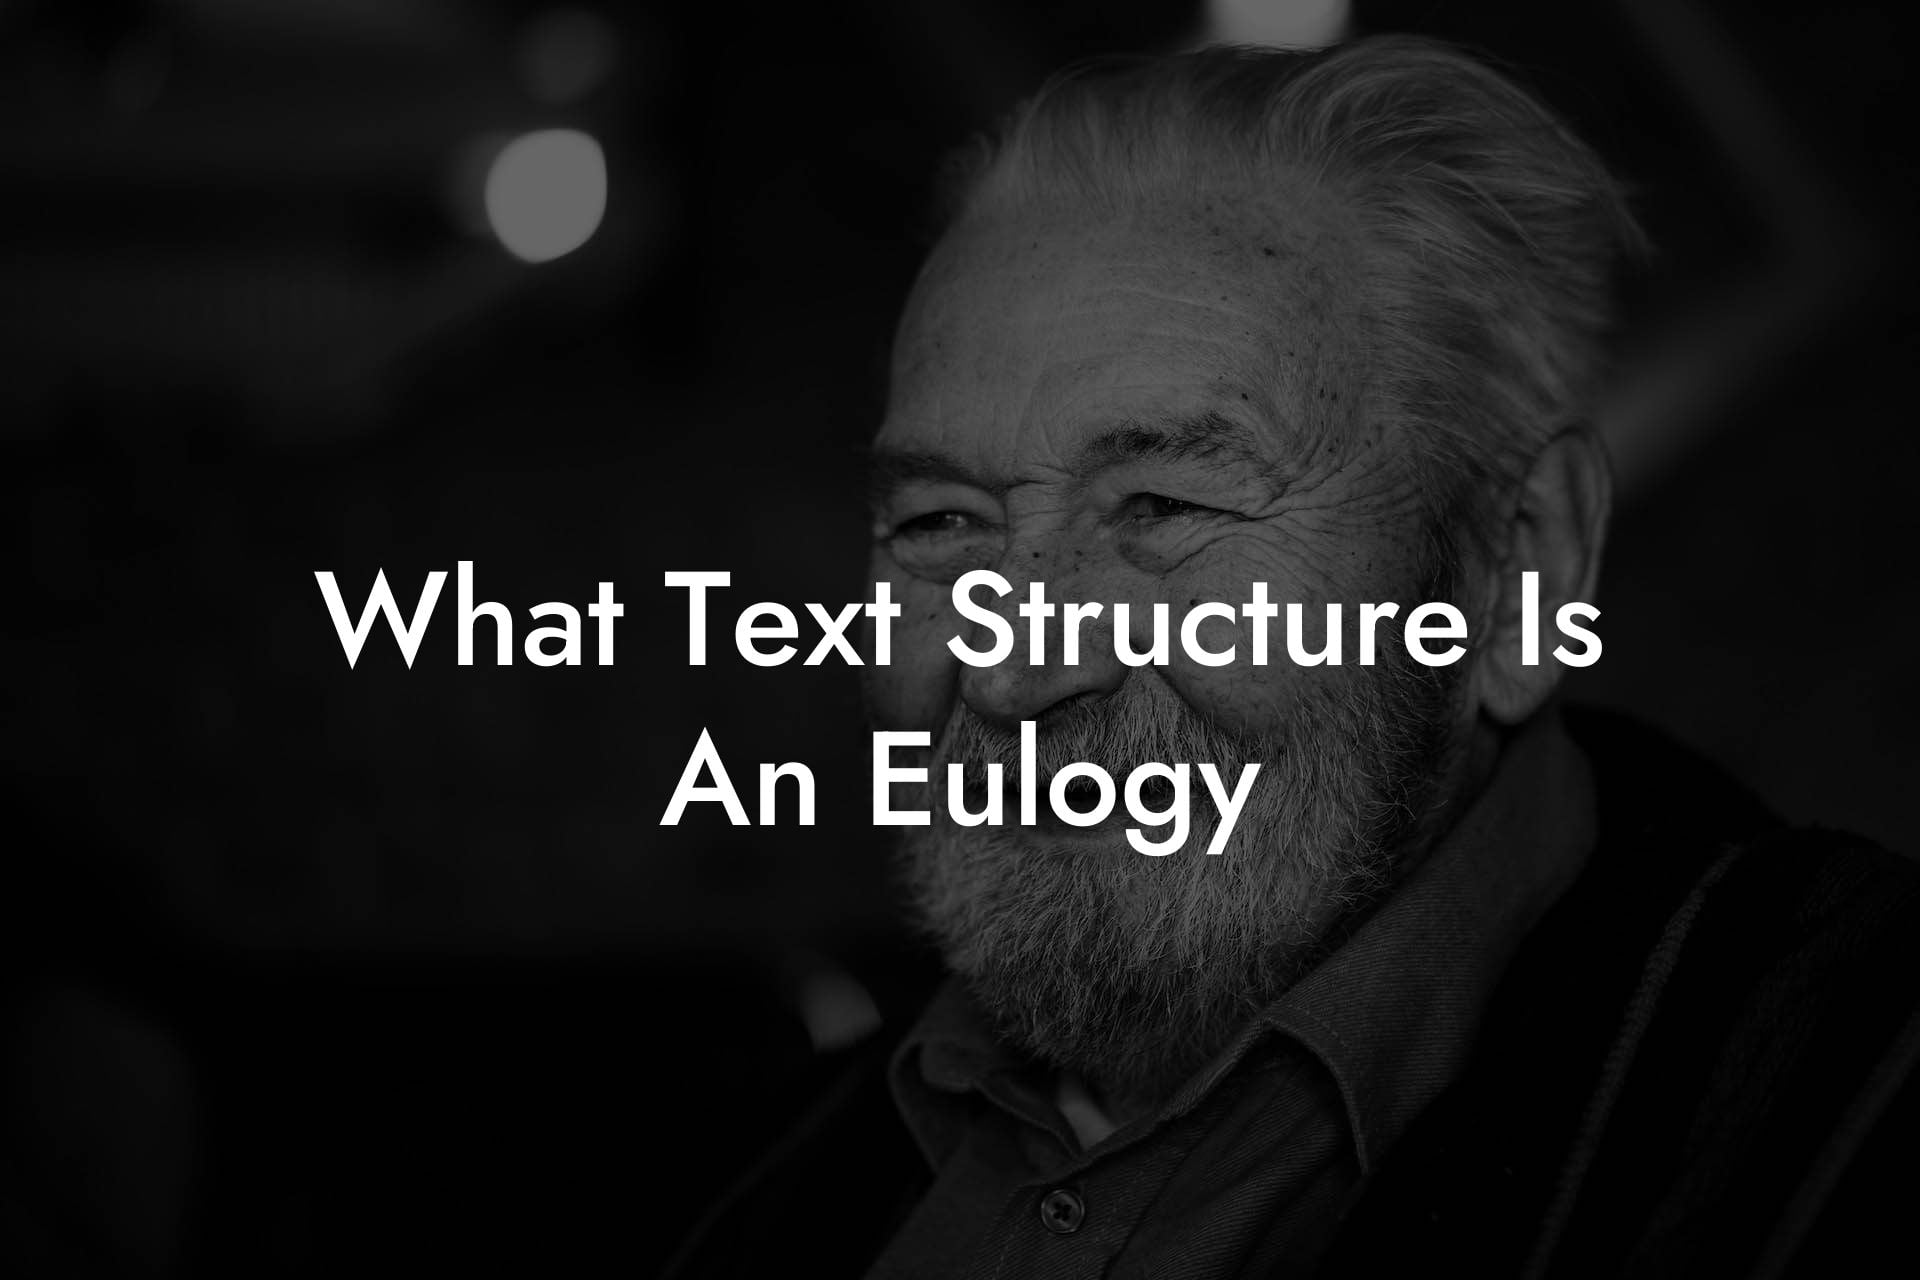 What Text Structure Is An Eulogy